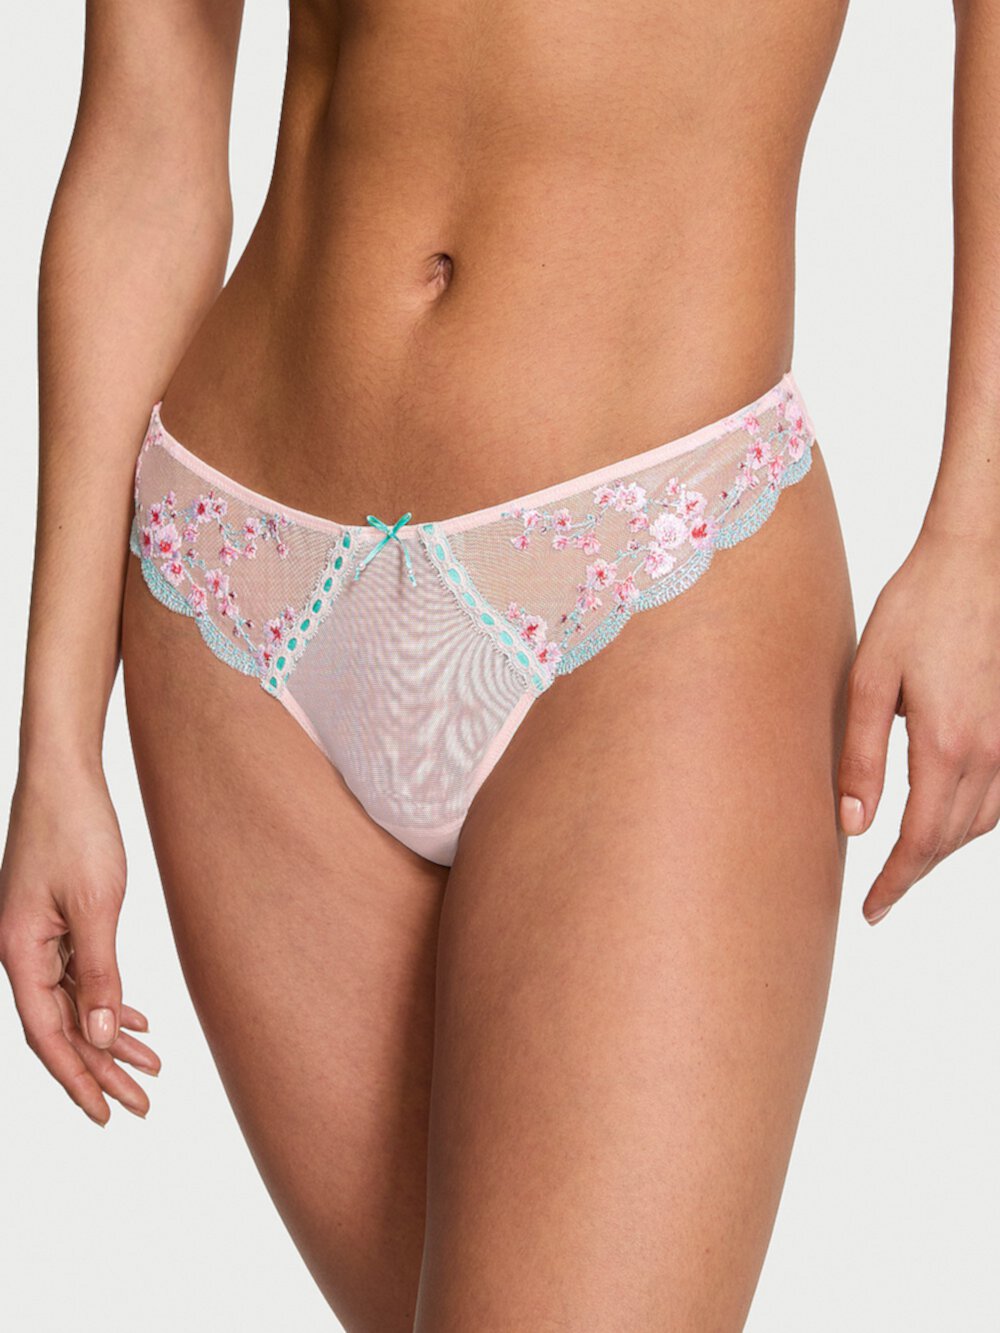 Cherry Blossom Embroidery Thong Panty Dream Angels